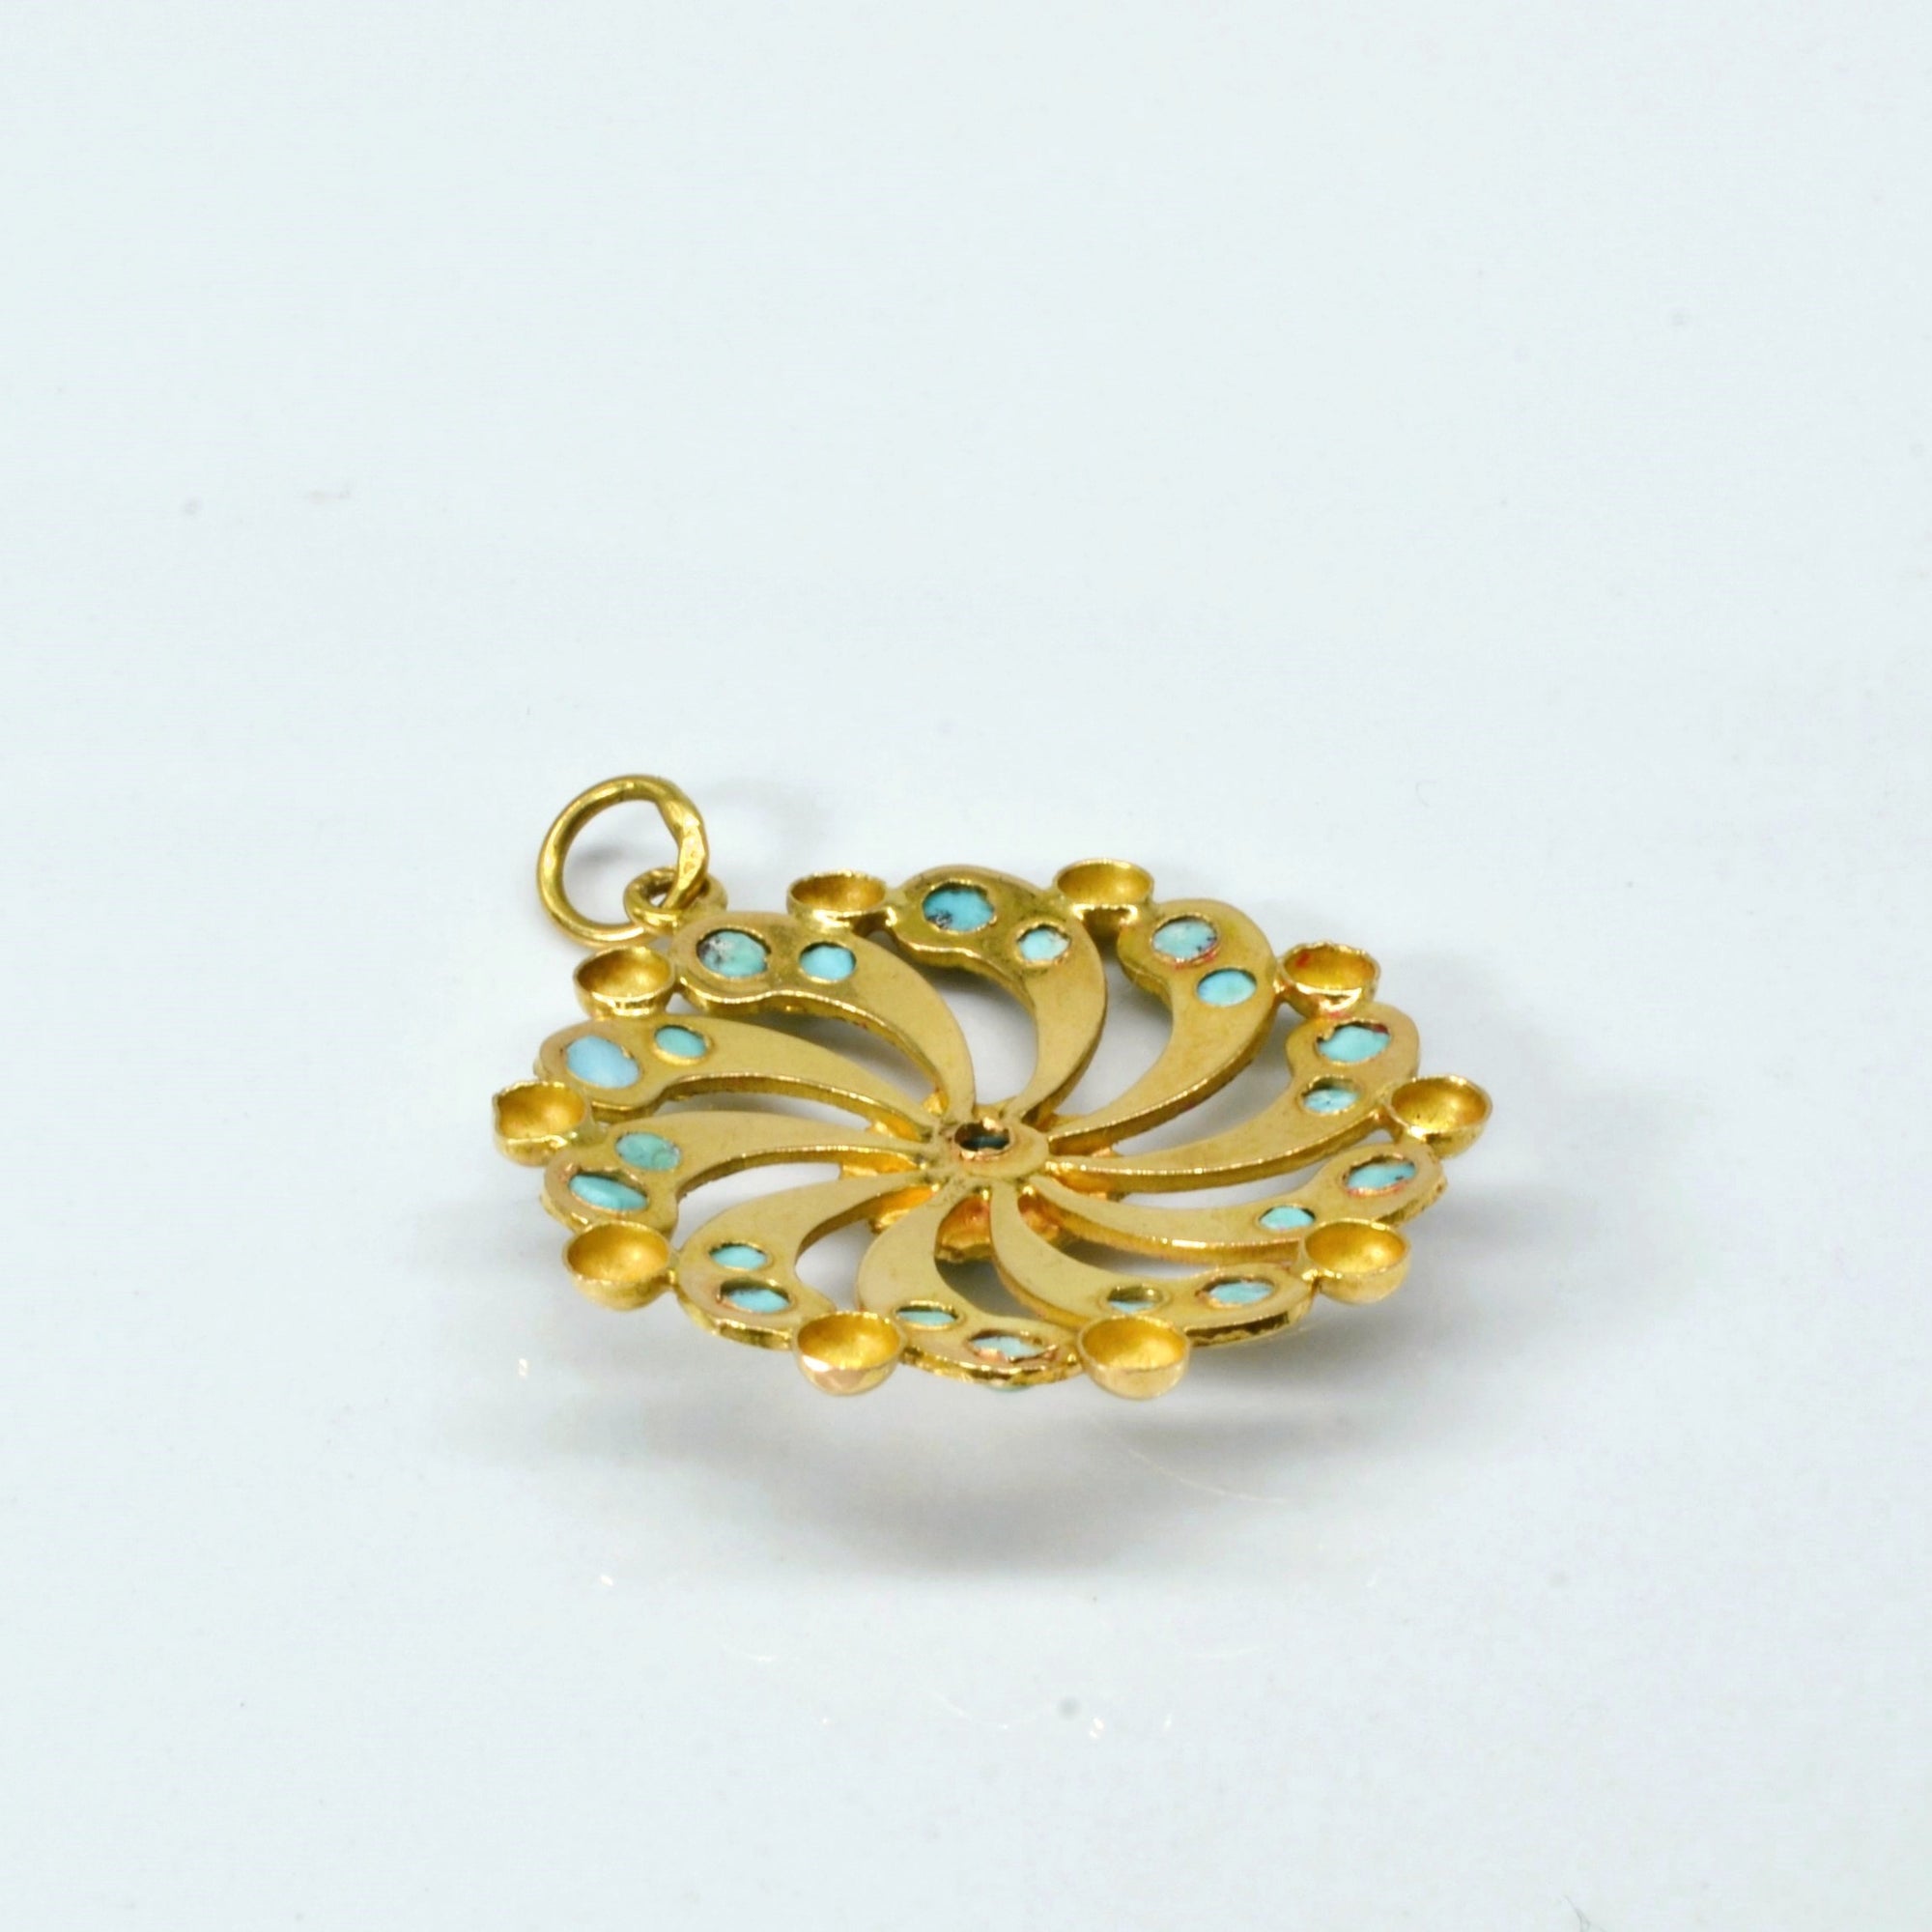 Turquoise Spiral Gold Pendant | 2.00ctw |